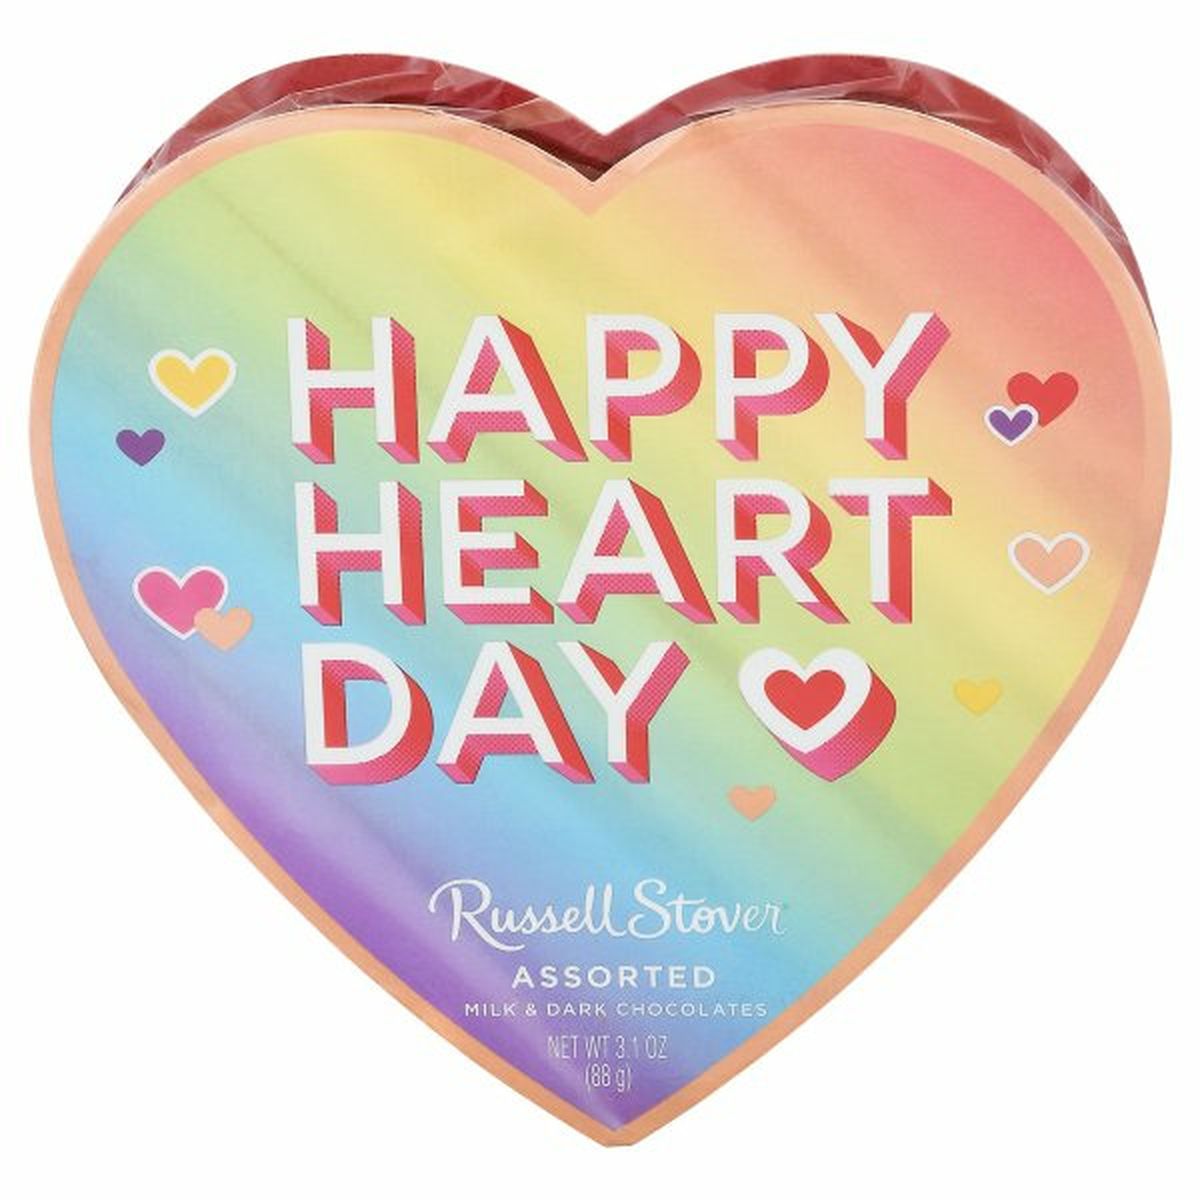 Calories in Russell Stover Milk & Dark Chocolates, Assorted, Happy Heart Day